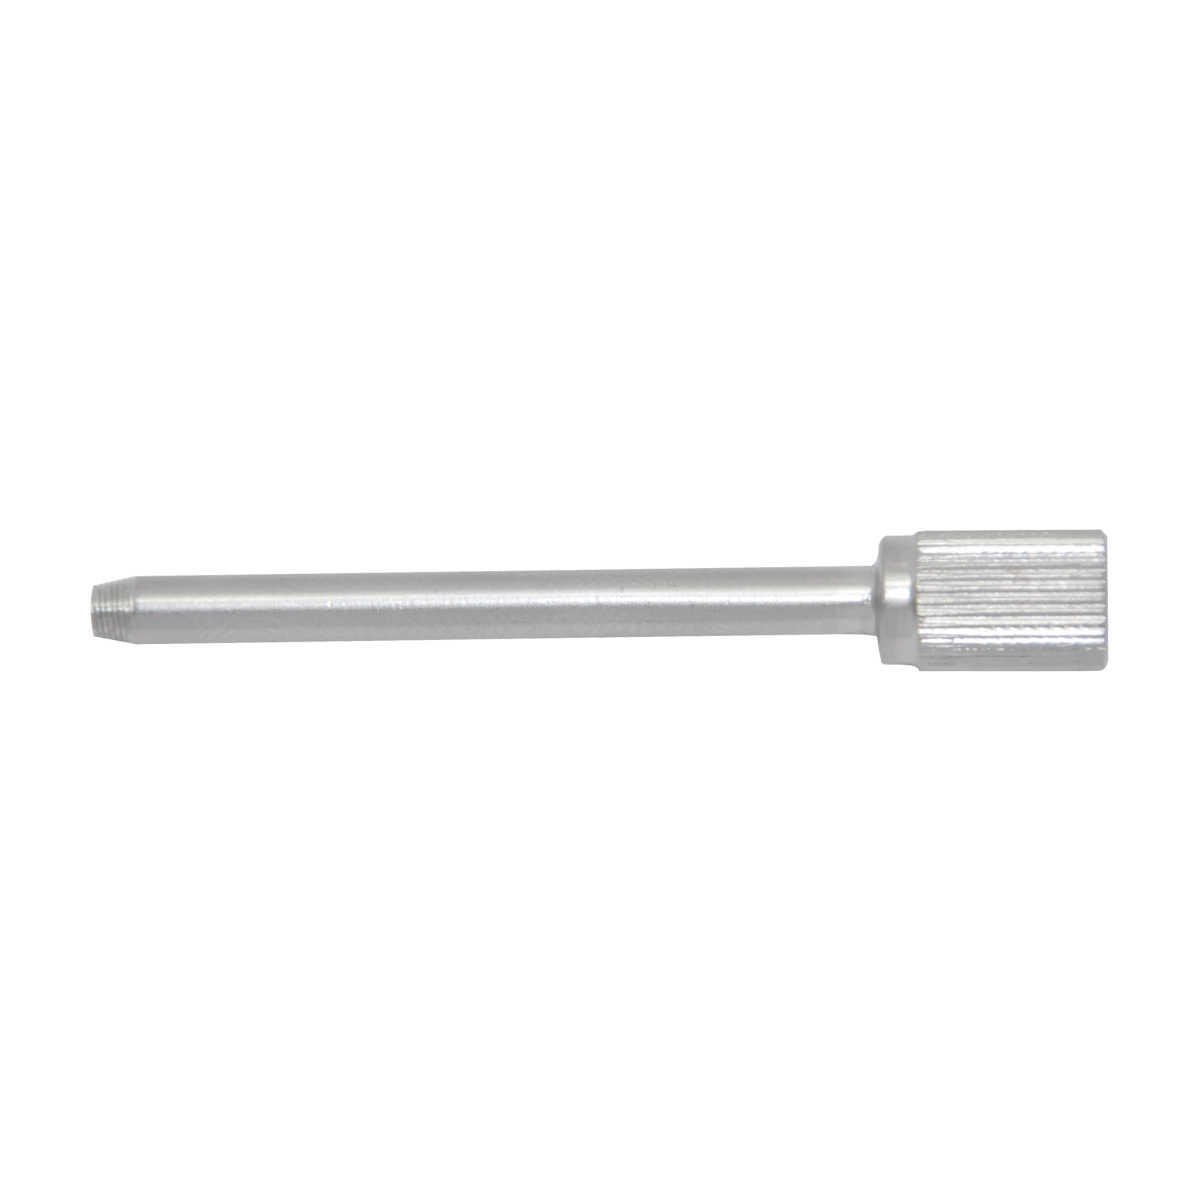 LCP-Drill-Sleeve-3.5mm-for-2.8mm-Drill-Bit